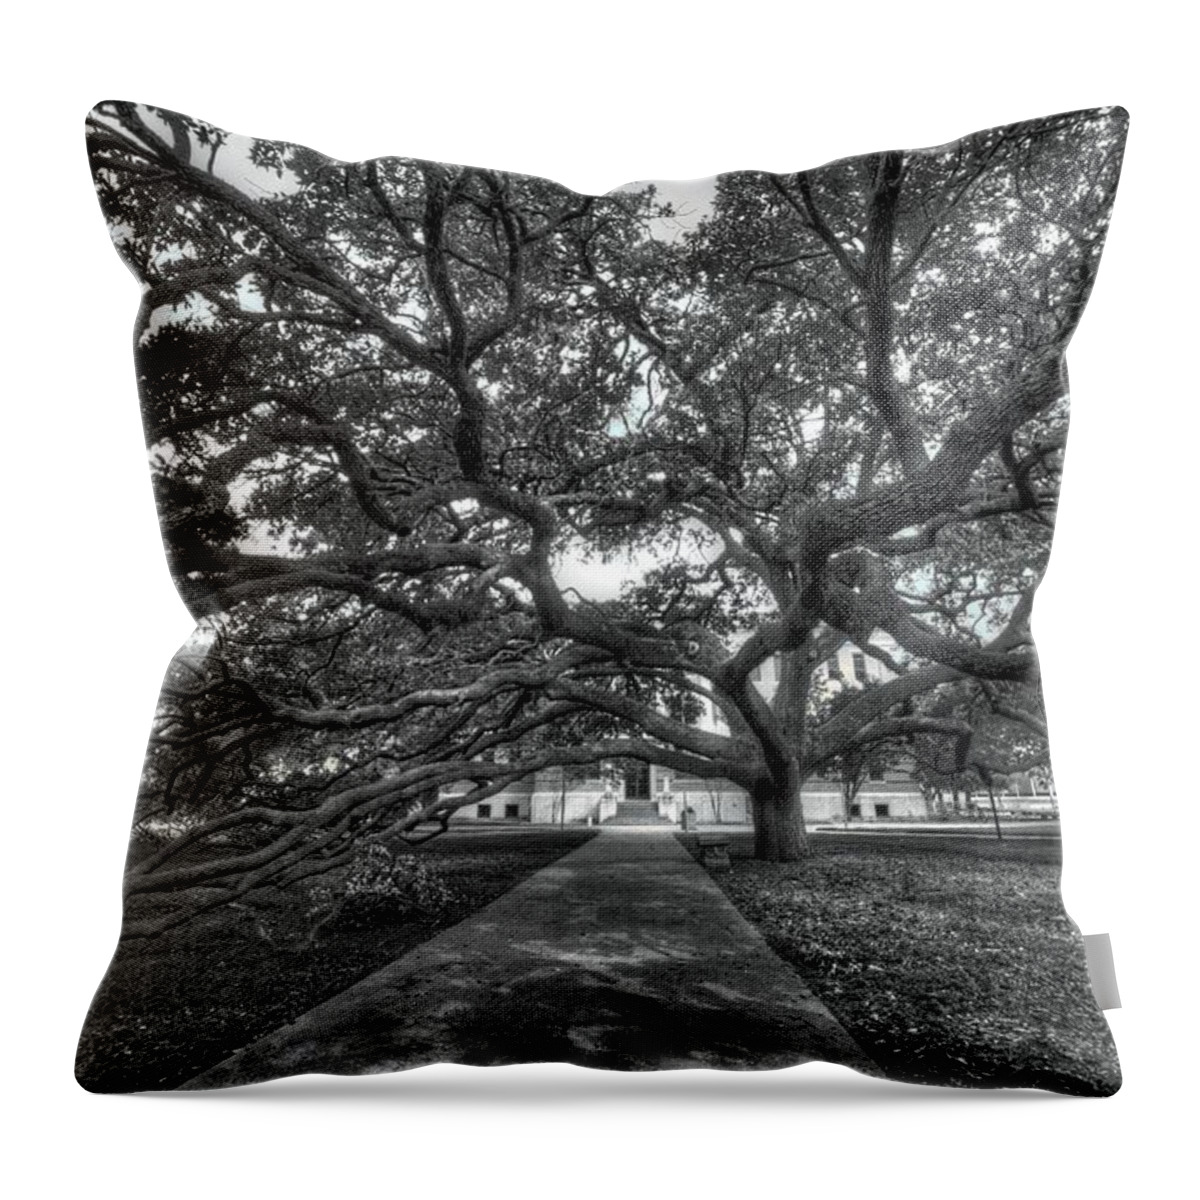 Century Tree Throw Pillow featuring the photograph Under the Century Tree - Black and White by David Morefield